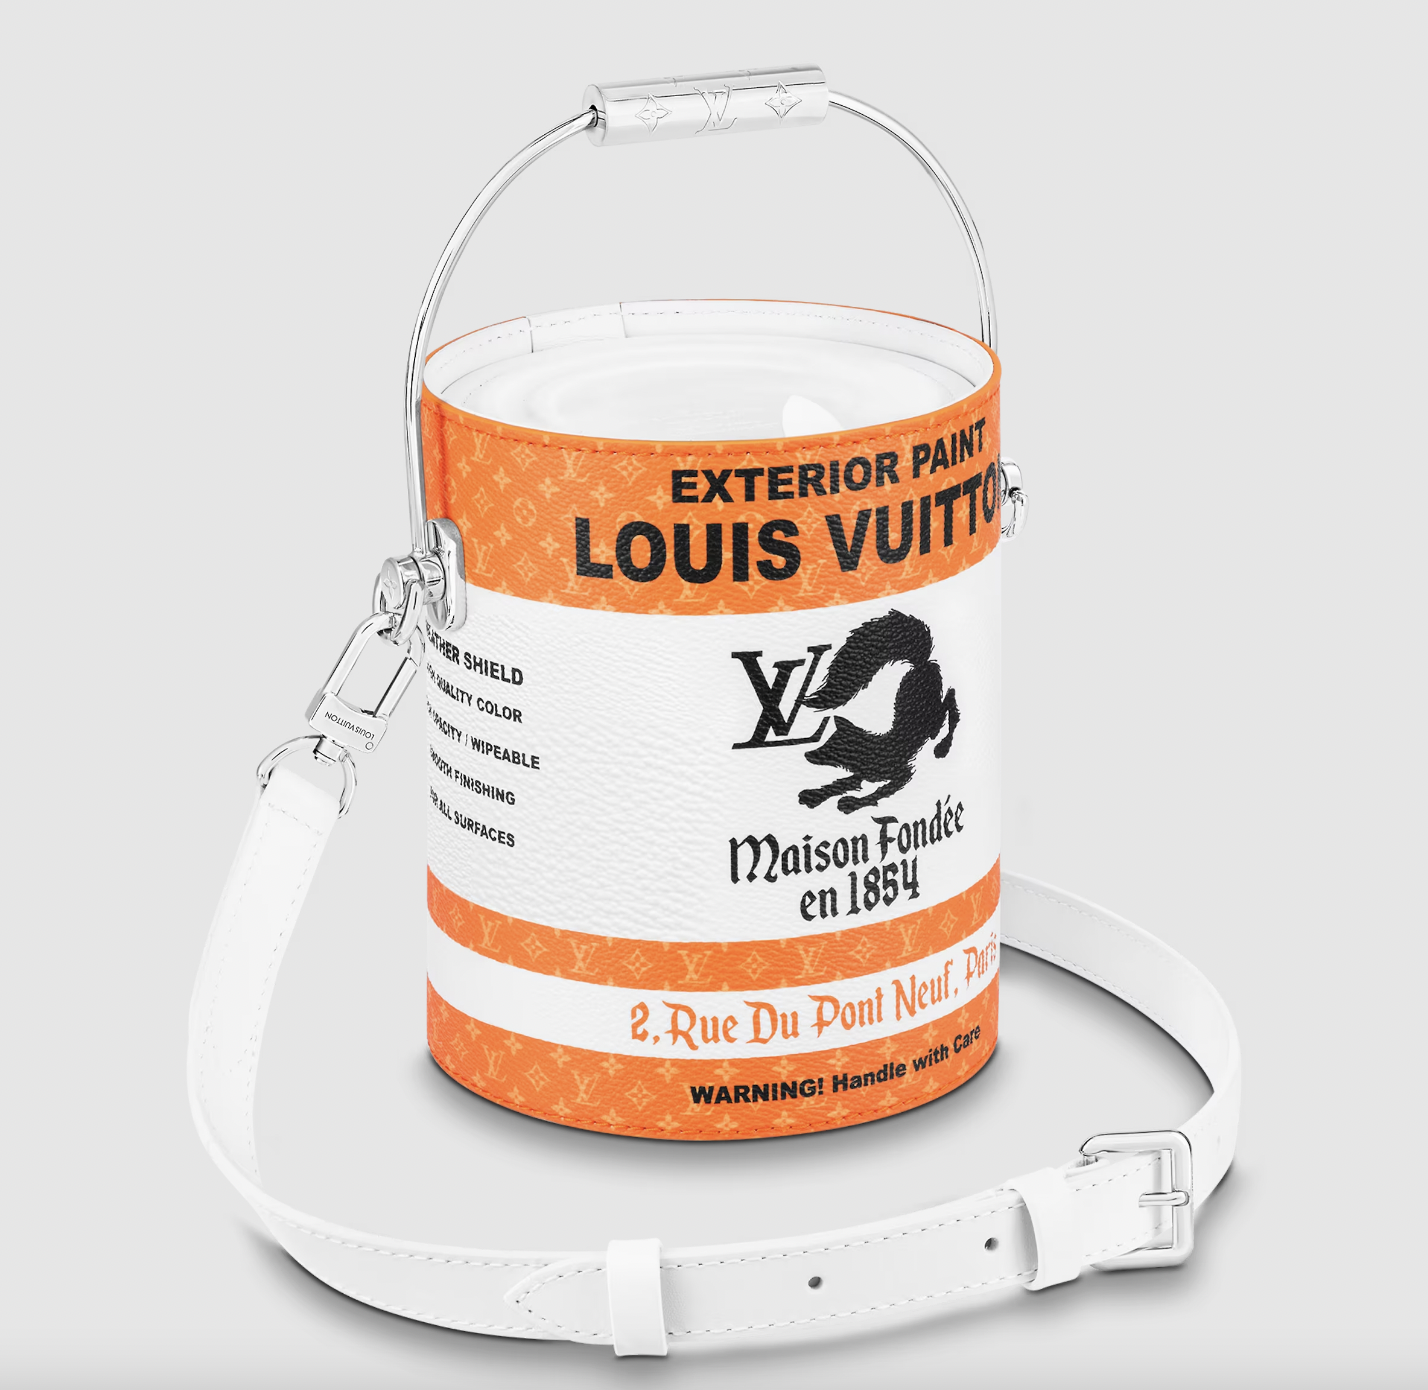 Fashion fans divided over £2,000 Louis Vuitton Paint Can bag from